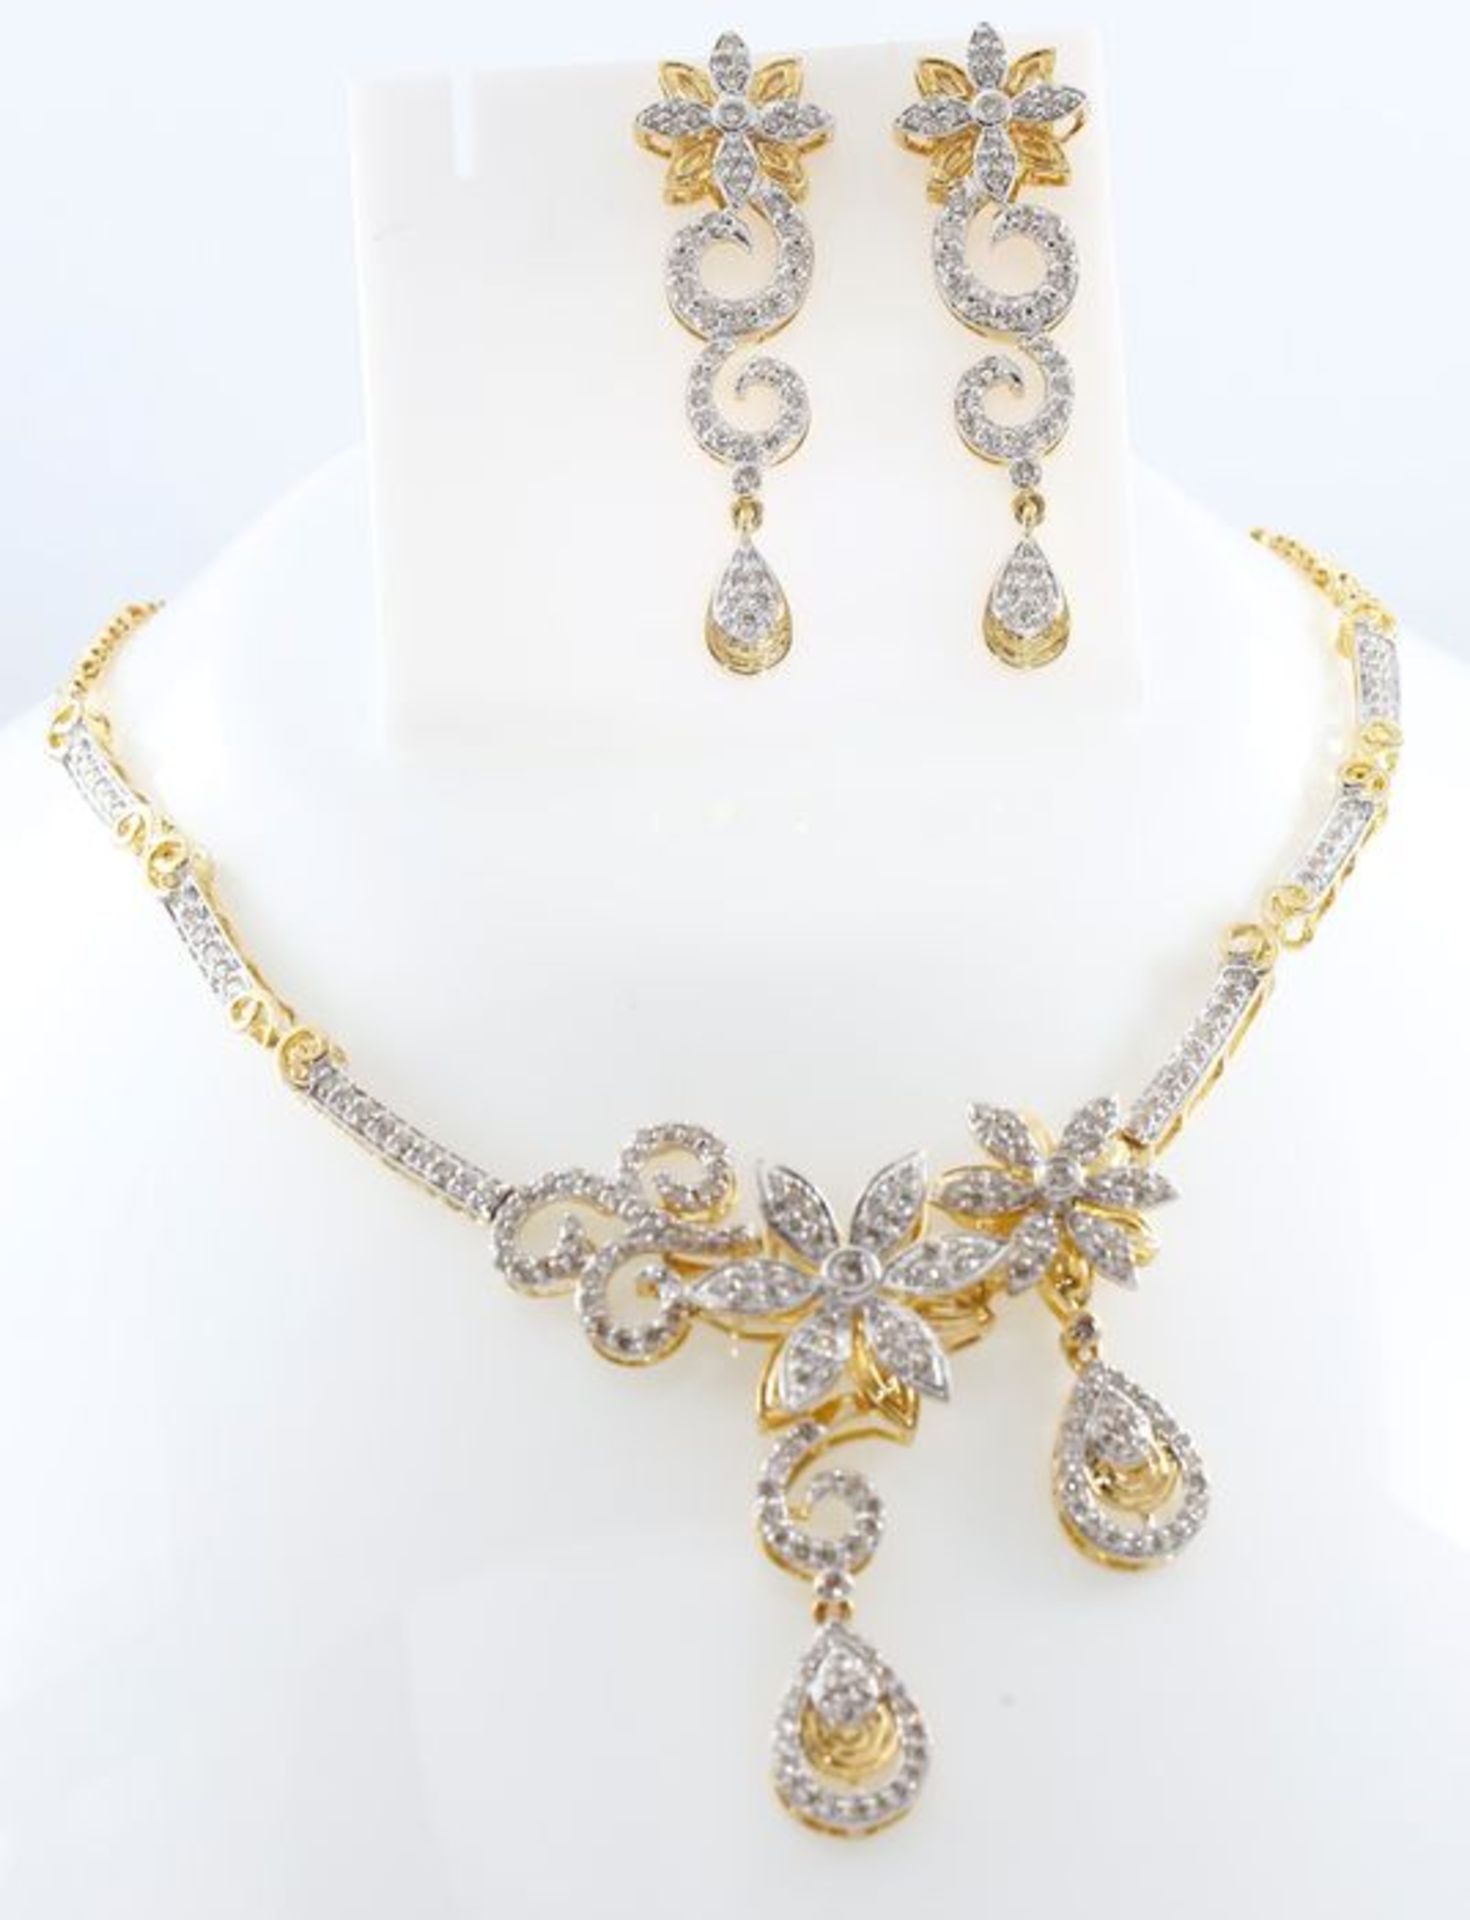 IGI Certified 14 K / 585 Yellow Gold Diamond Necklace with Matching Chandelier Earrings - Image 5 of 8